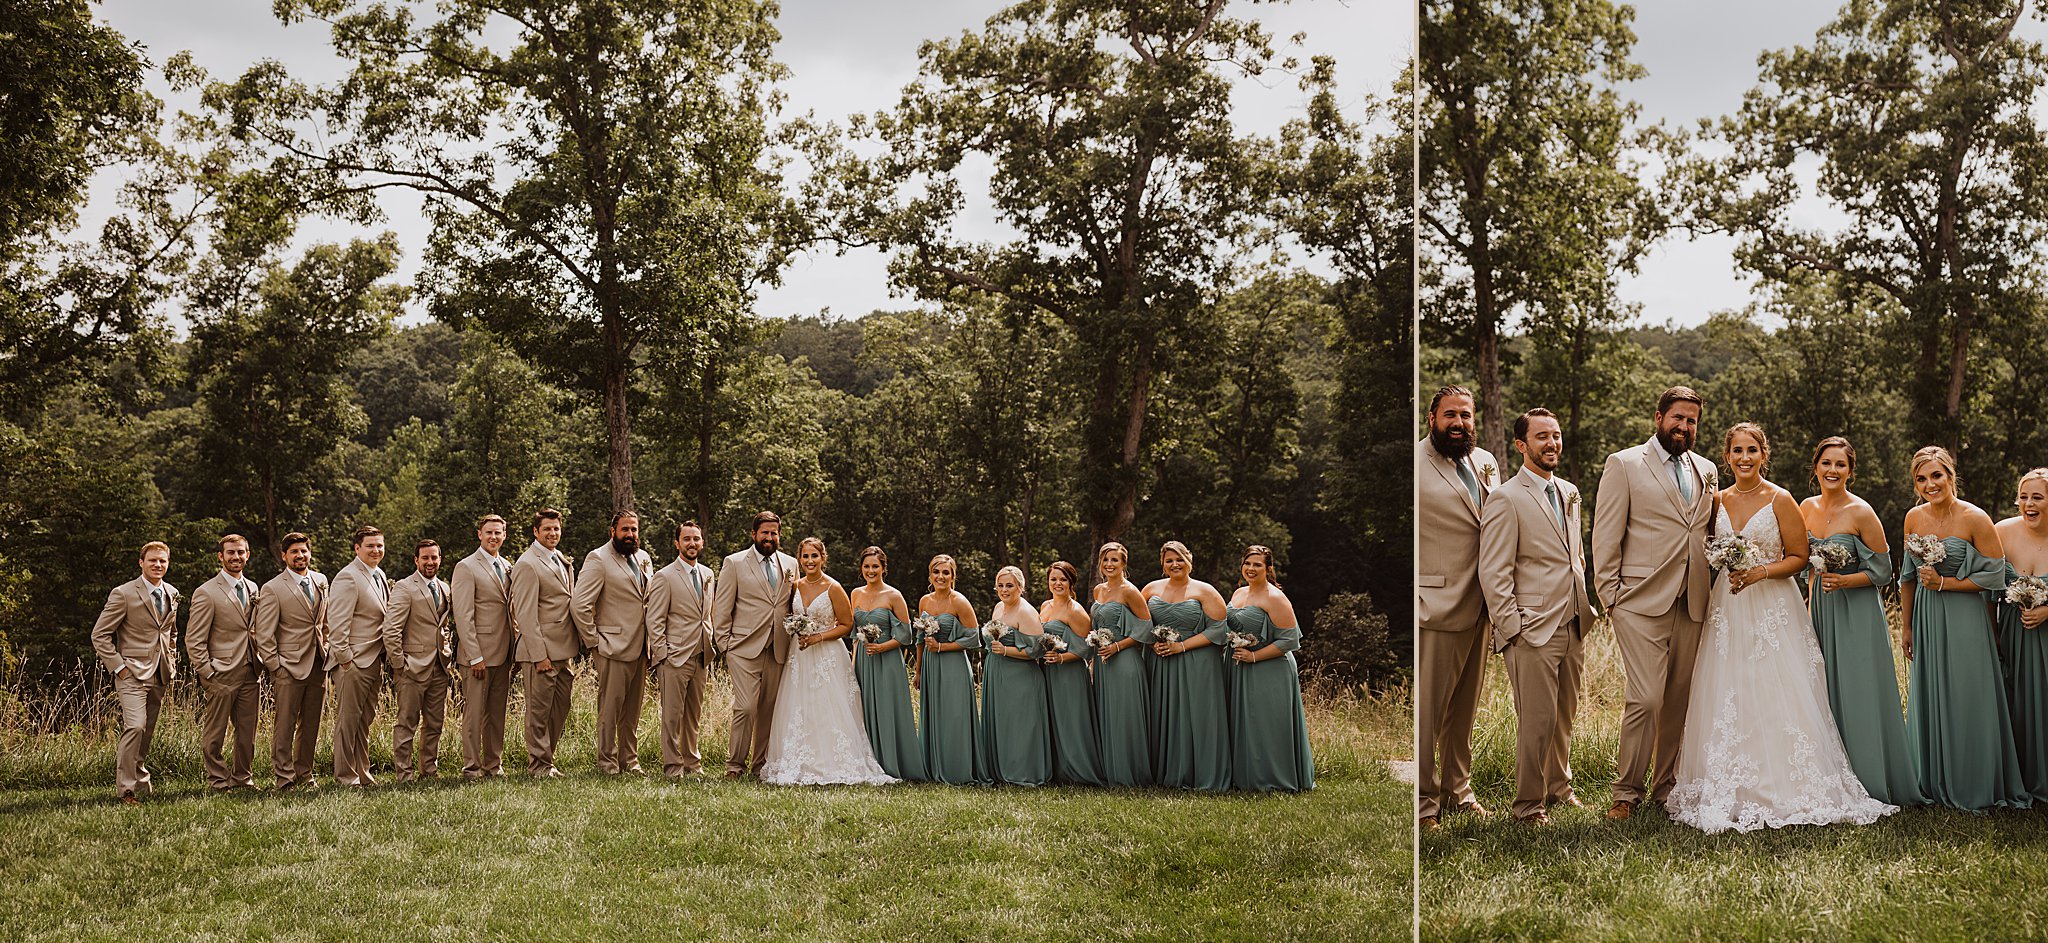 Wedding Party Photos at Silver Oaks Chateau